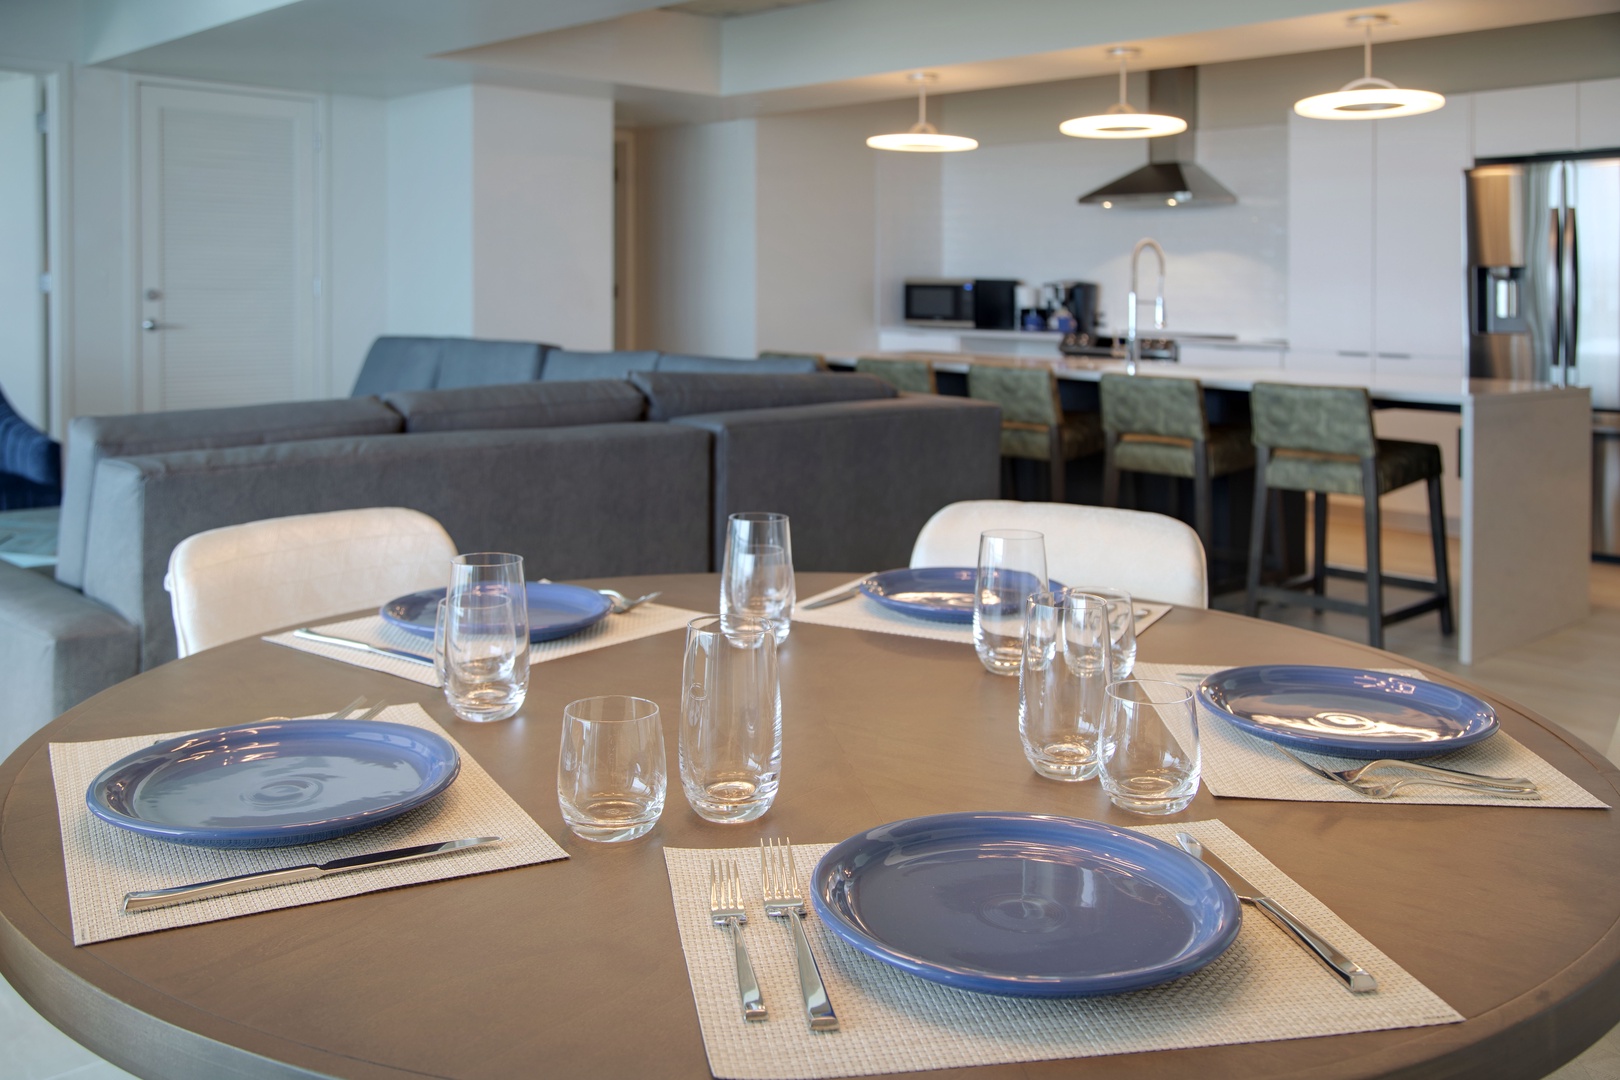 Oceanfront Dining Starts Here: Fully Equipped Kitchen Designed for Convenience